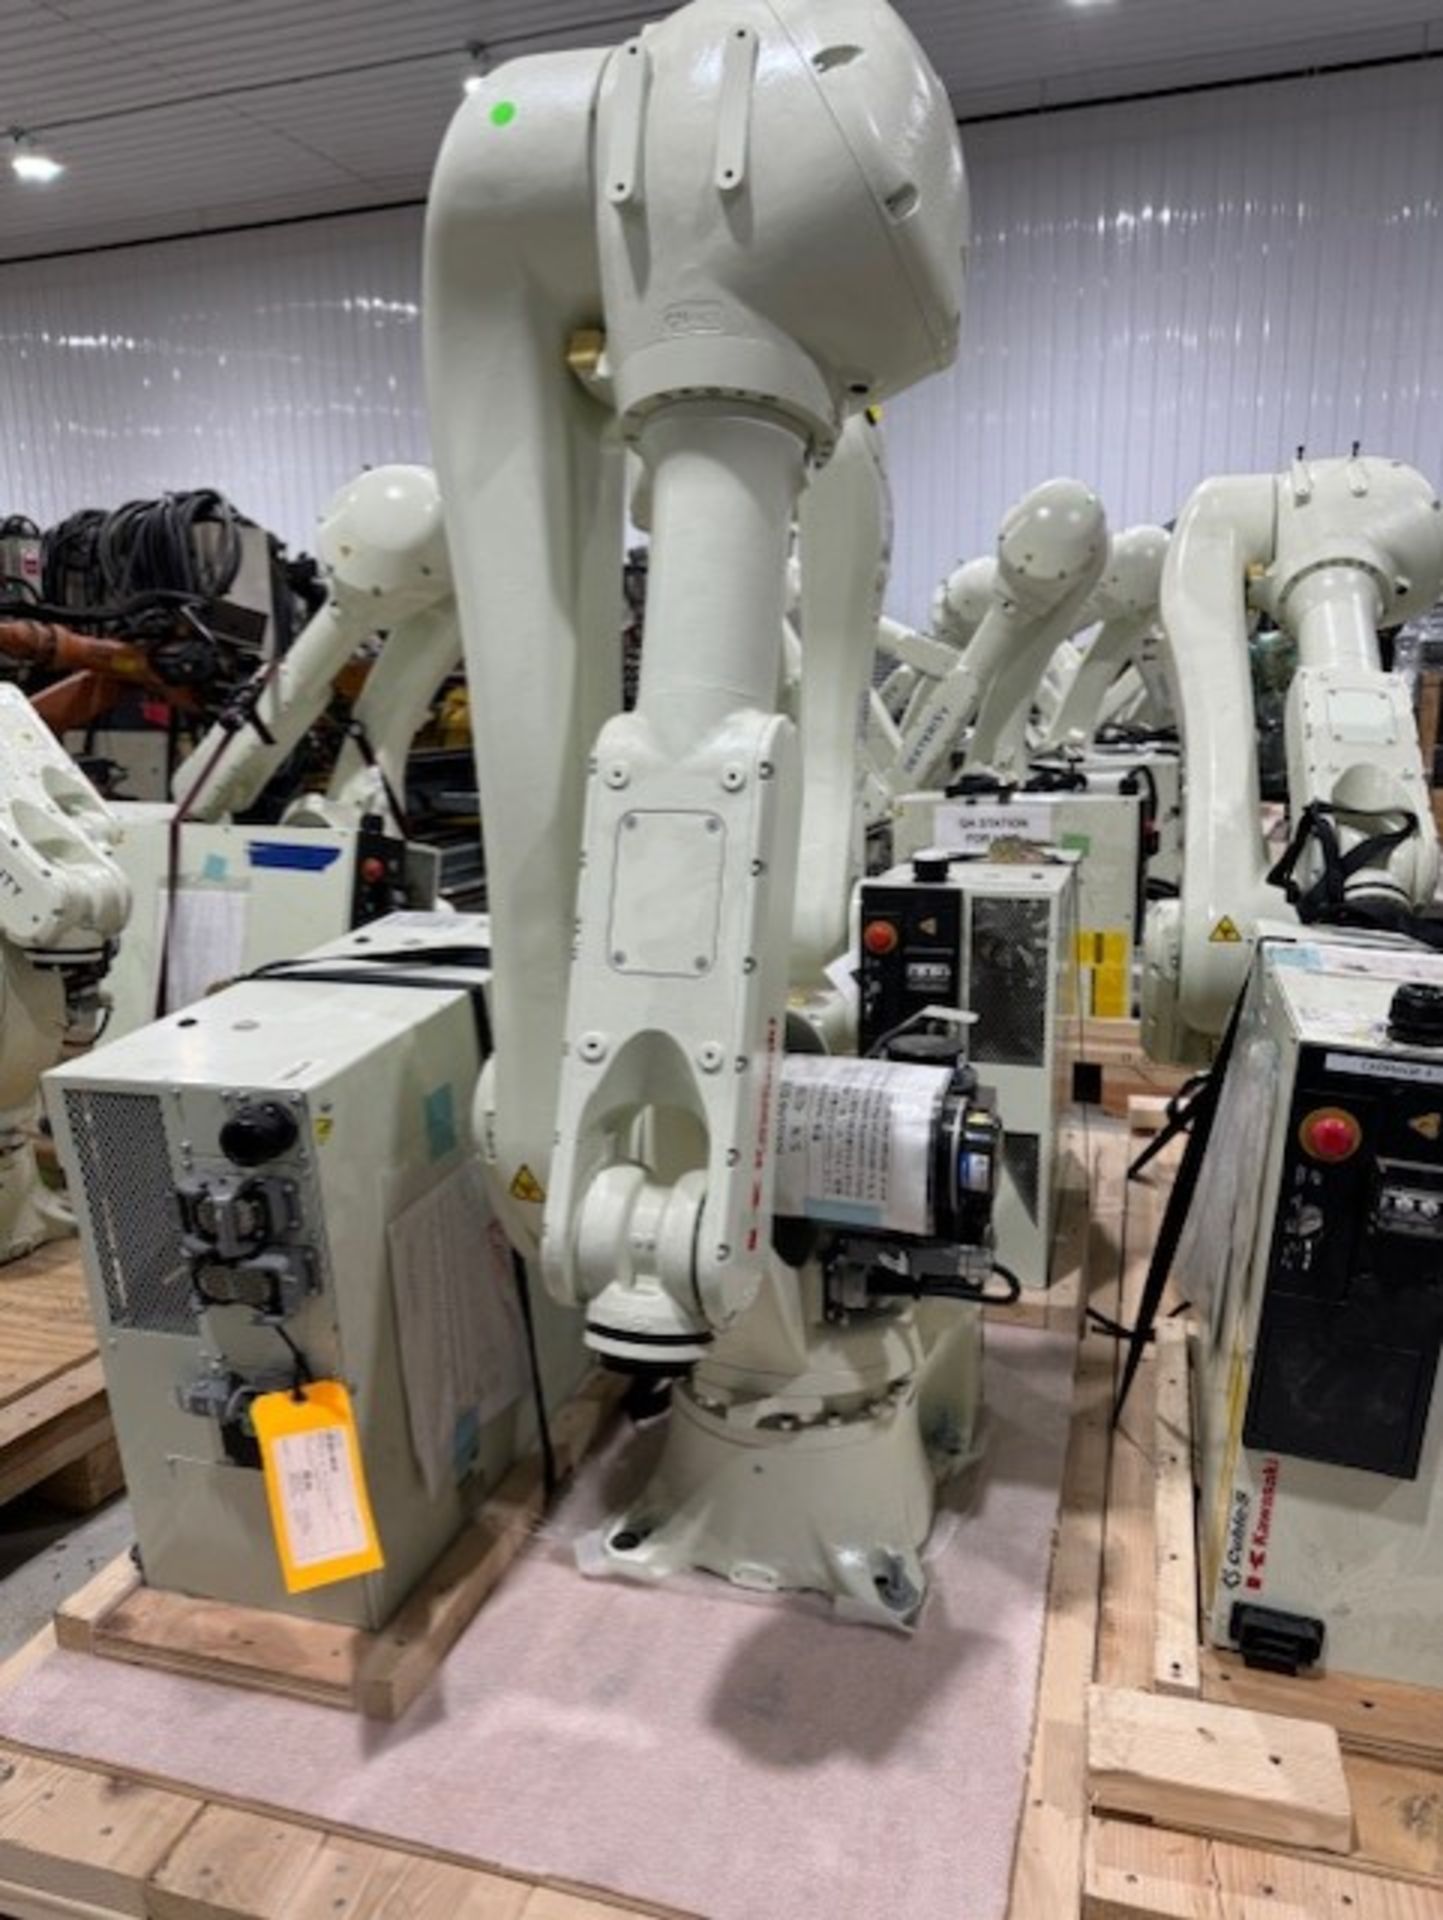 LIGHTLY USED KAWASAKI ROBOT RS020N, SN 4509 20KG X 1725MM REACH WITH EO1 CONTROLS, CABLES & TEACH